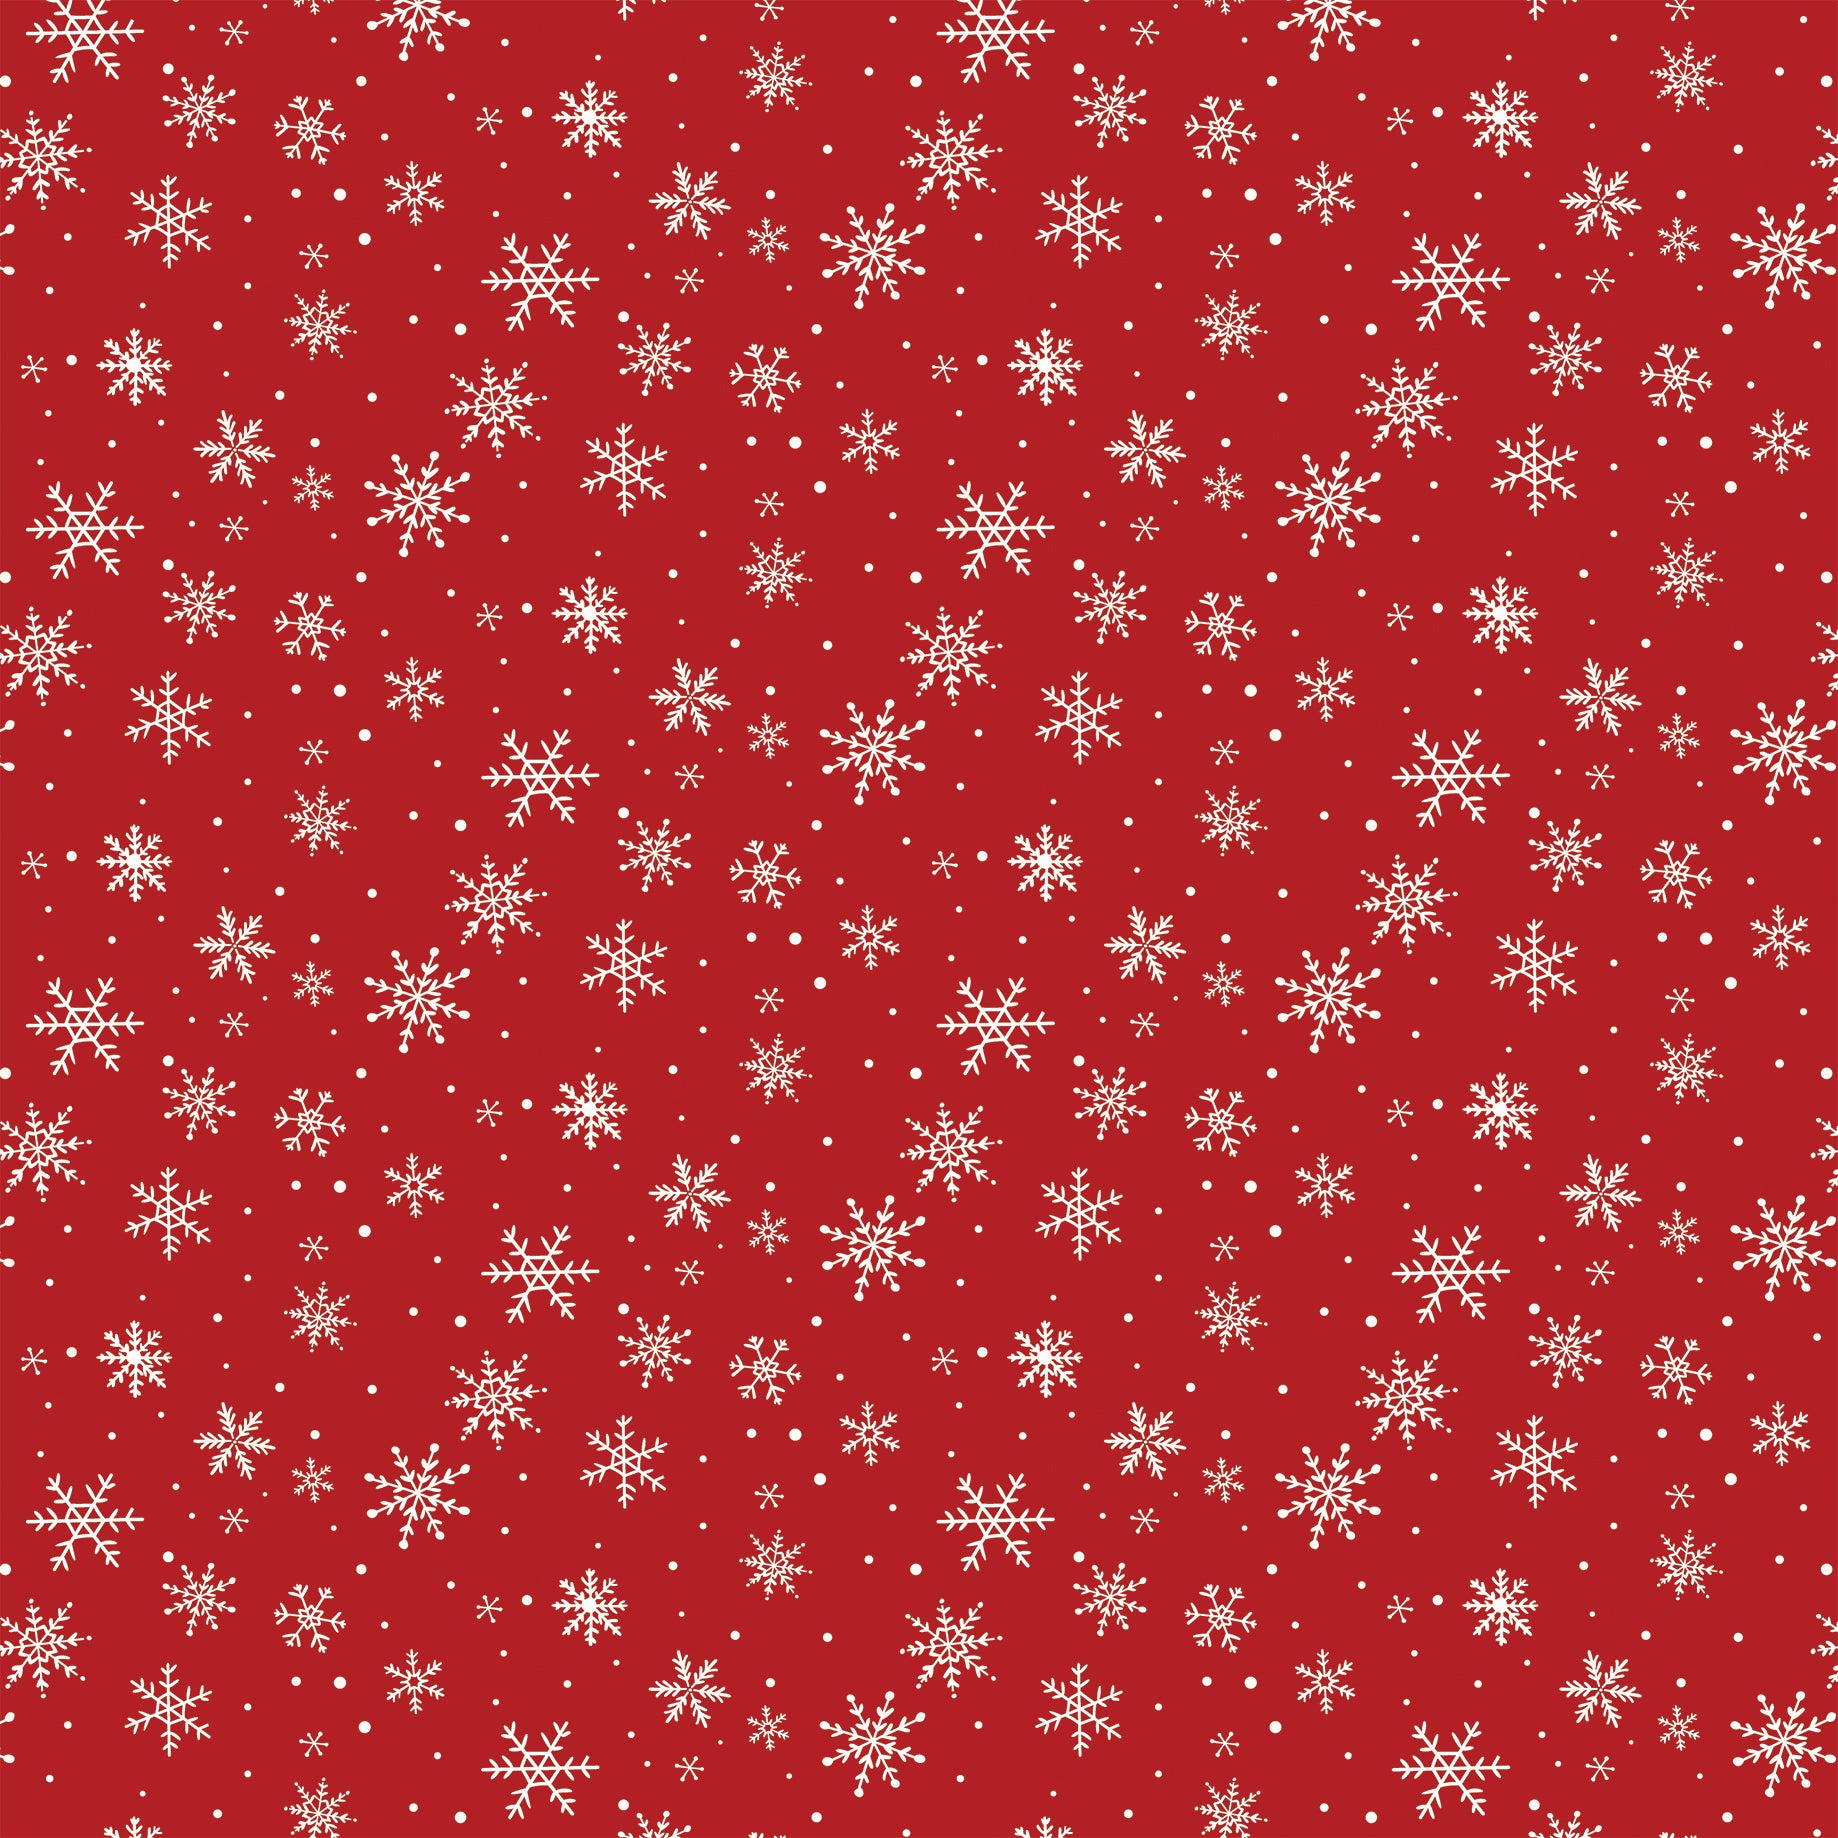 Christmas Time Collection Snowflakes Falling 12 x 12 Double-Sided Scrapbook Paper by Echo Park Paper